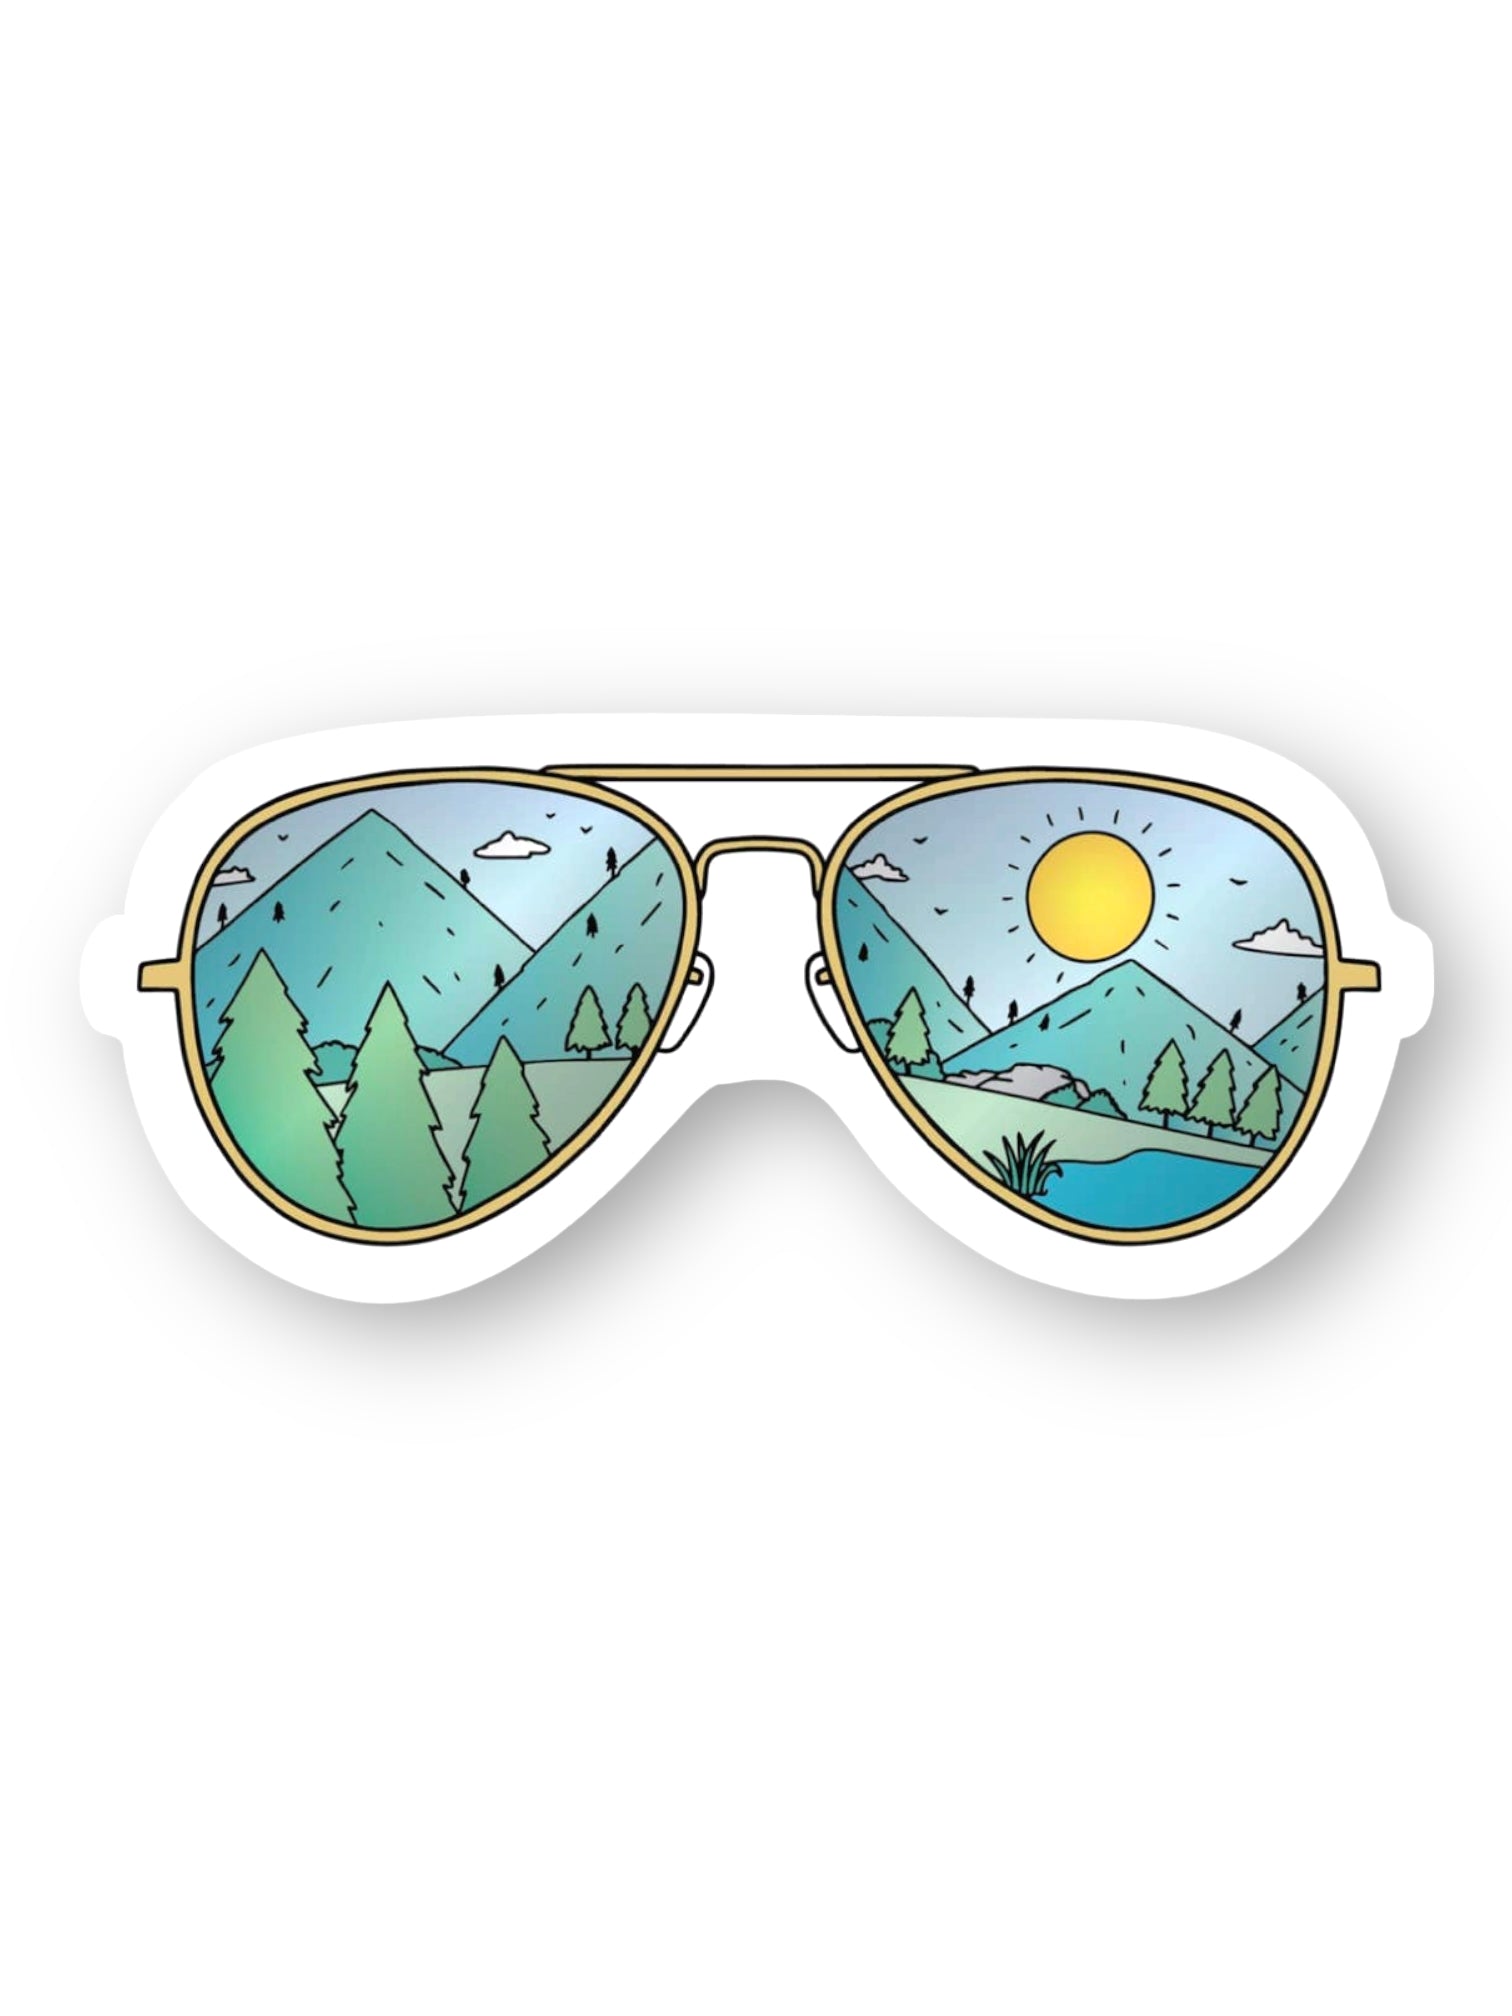 Mountains Nature Sunglasses Sticker by Big Moods, Sold by Le Monkey House